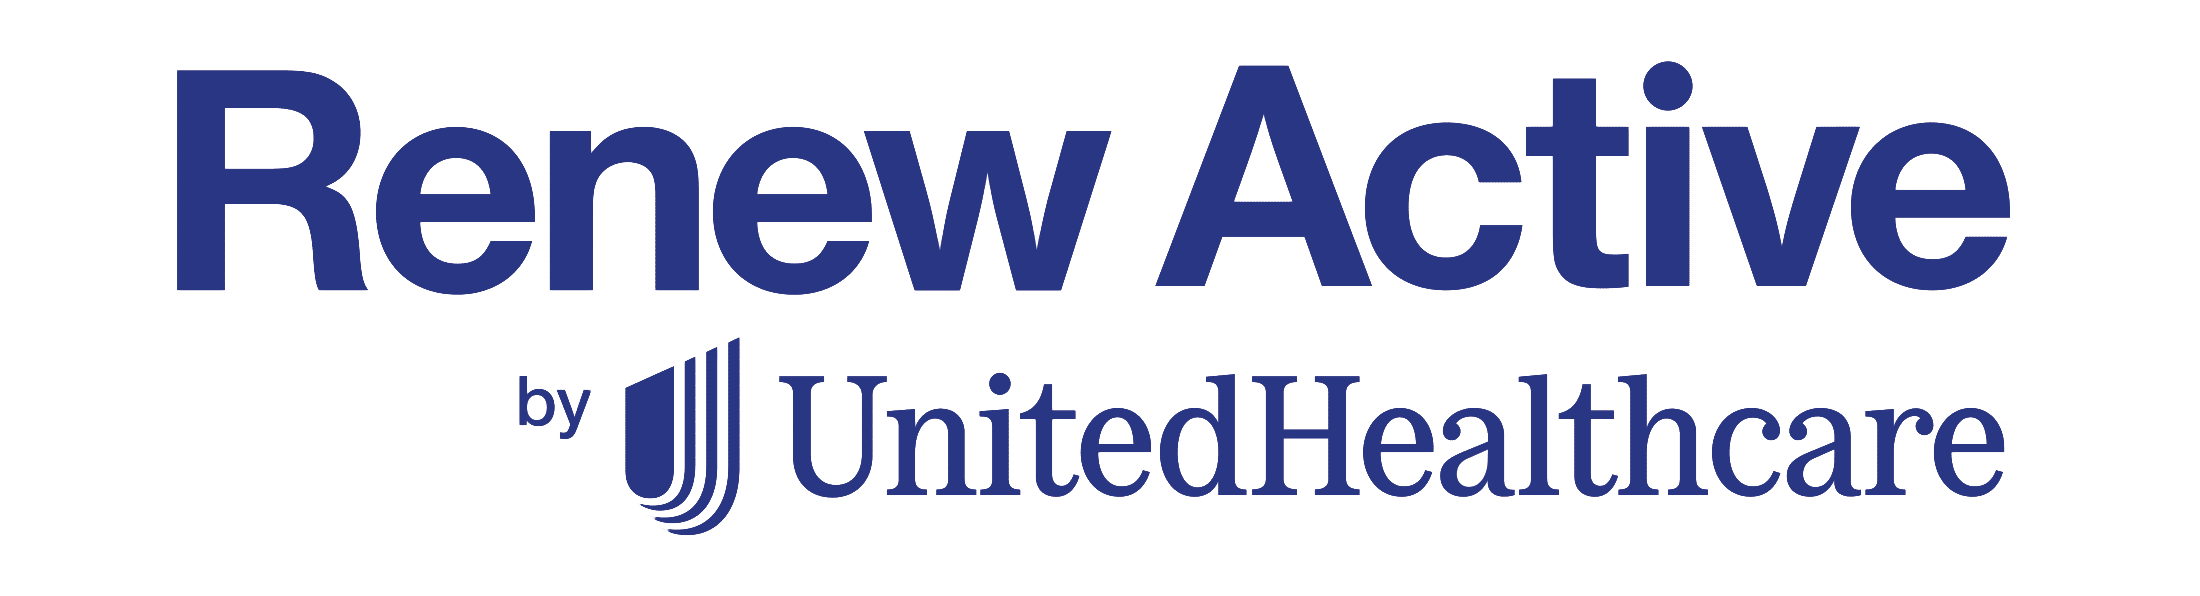 Renew Active by United Healthcare